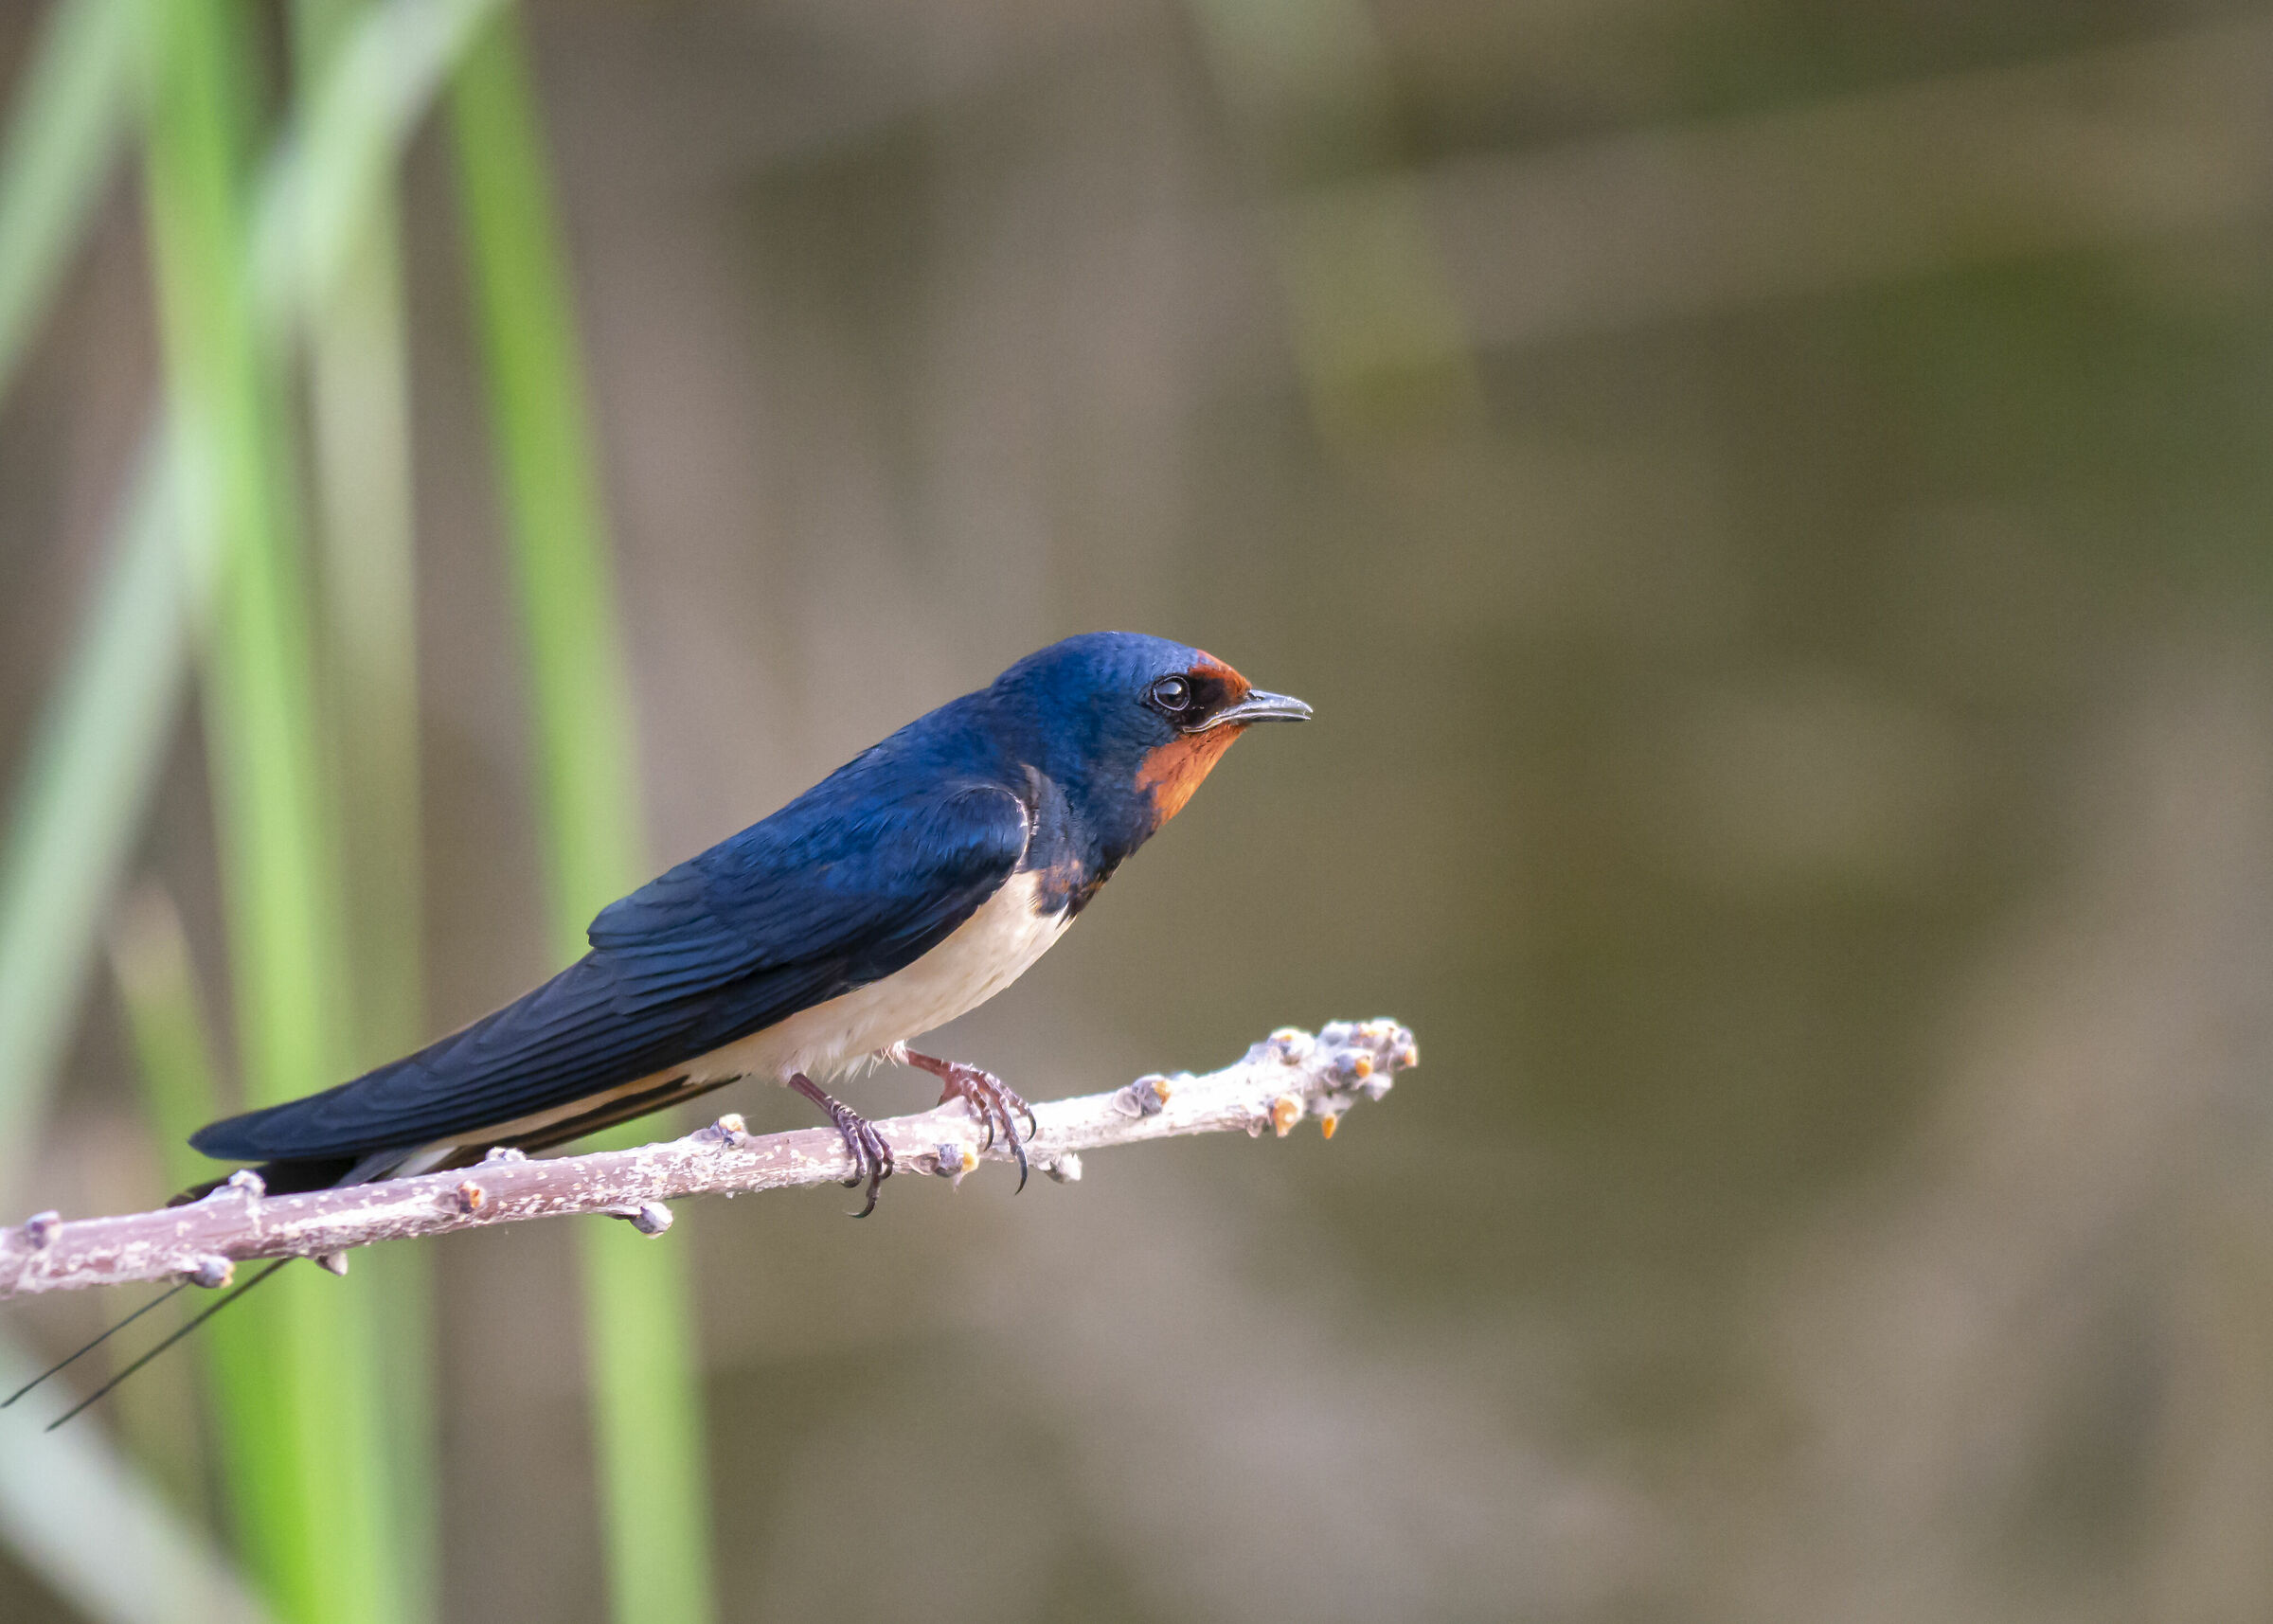 Kissed by the last lights of the day (Hirundo rustica)...